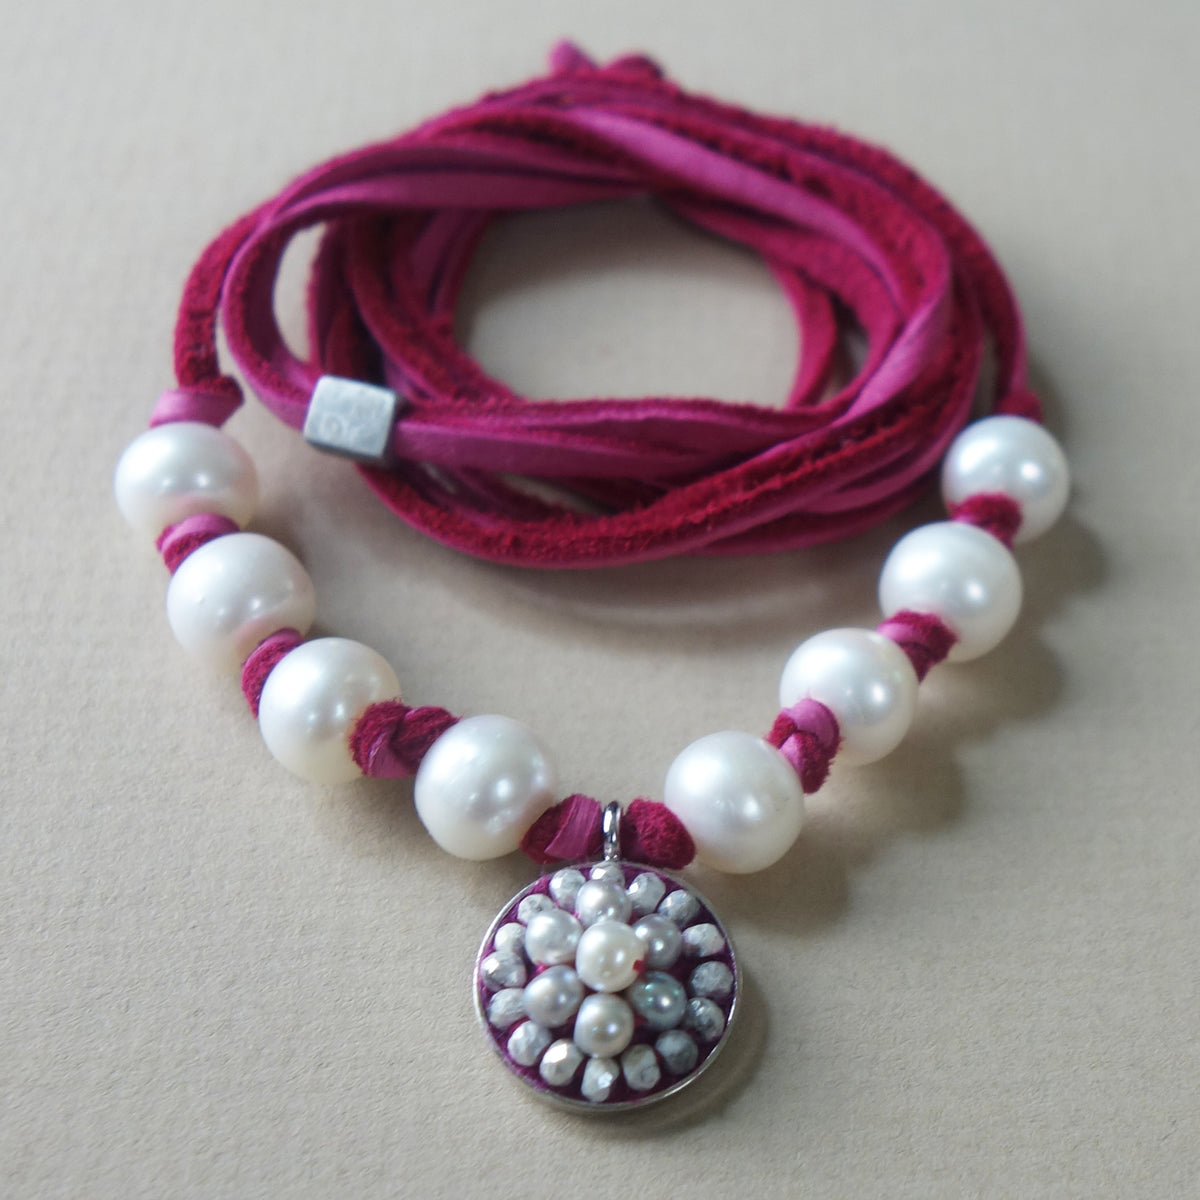 Under the Serious Moonlight pearl mosaic necklace/bracelet